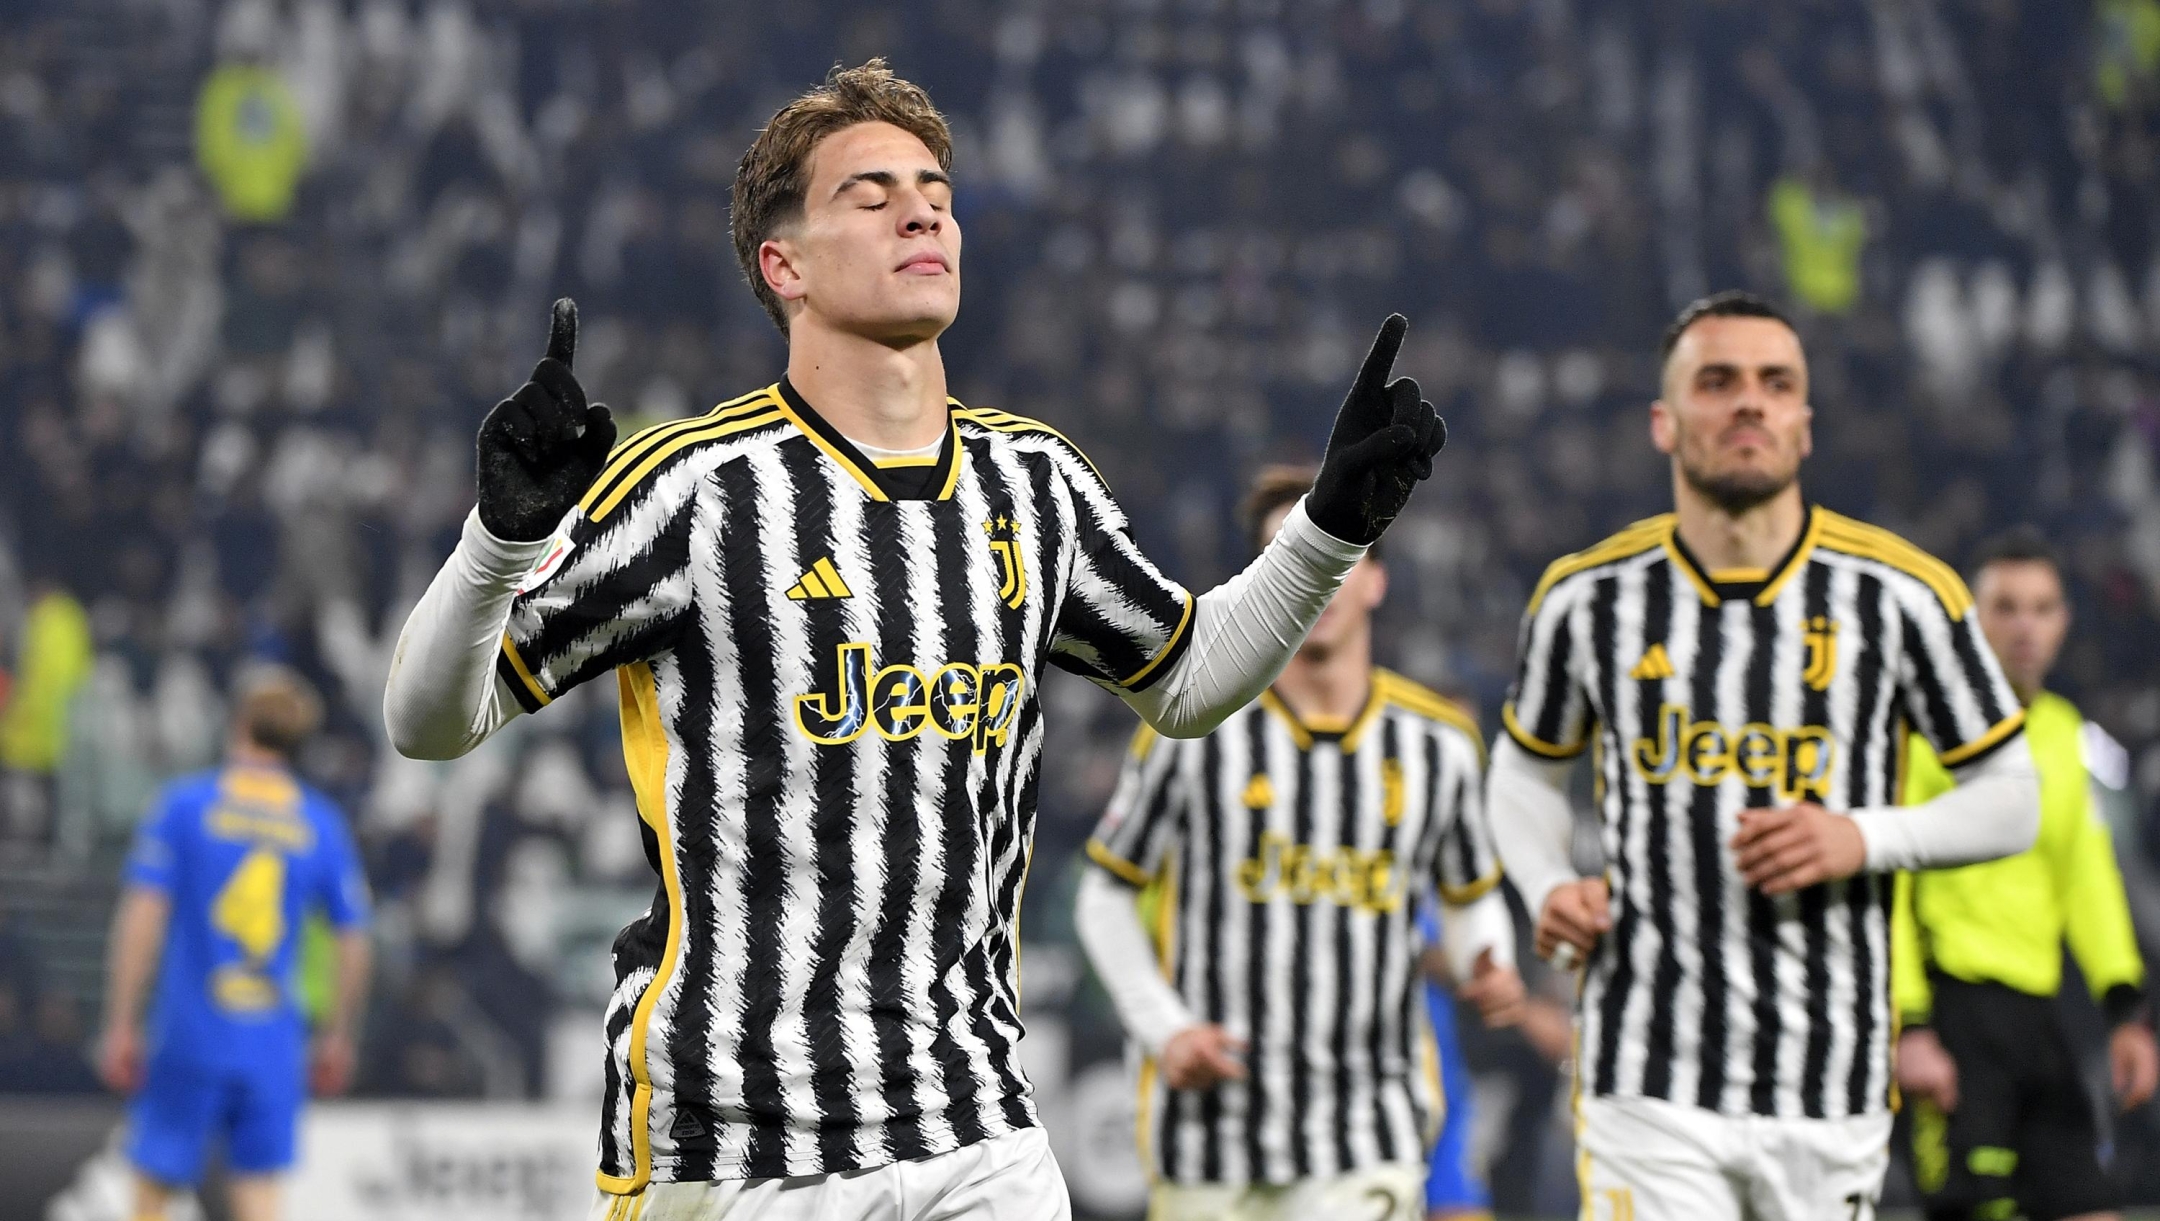 TURIN, ITALY - JANUARY 11: Kenan Yildiz of Juventus celebrates after scoring his team's fourth goal during the Coppa Italia Quarter-Final match between Juventus FC and Frosinone Calcio at Allianz Stadium on January 11, 2024 in Turin, Italy. (Photo by Filippo Alfero - Juventus FC/Juventus FC via Getty Images)